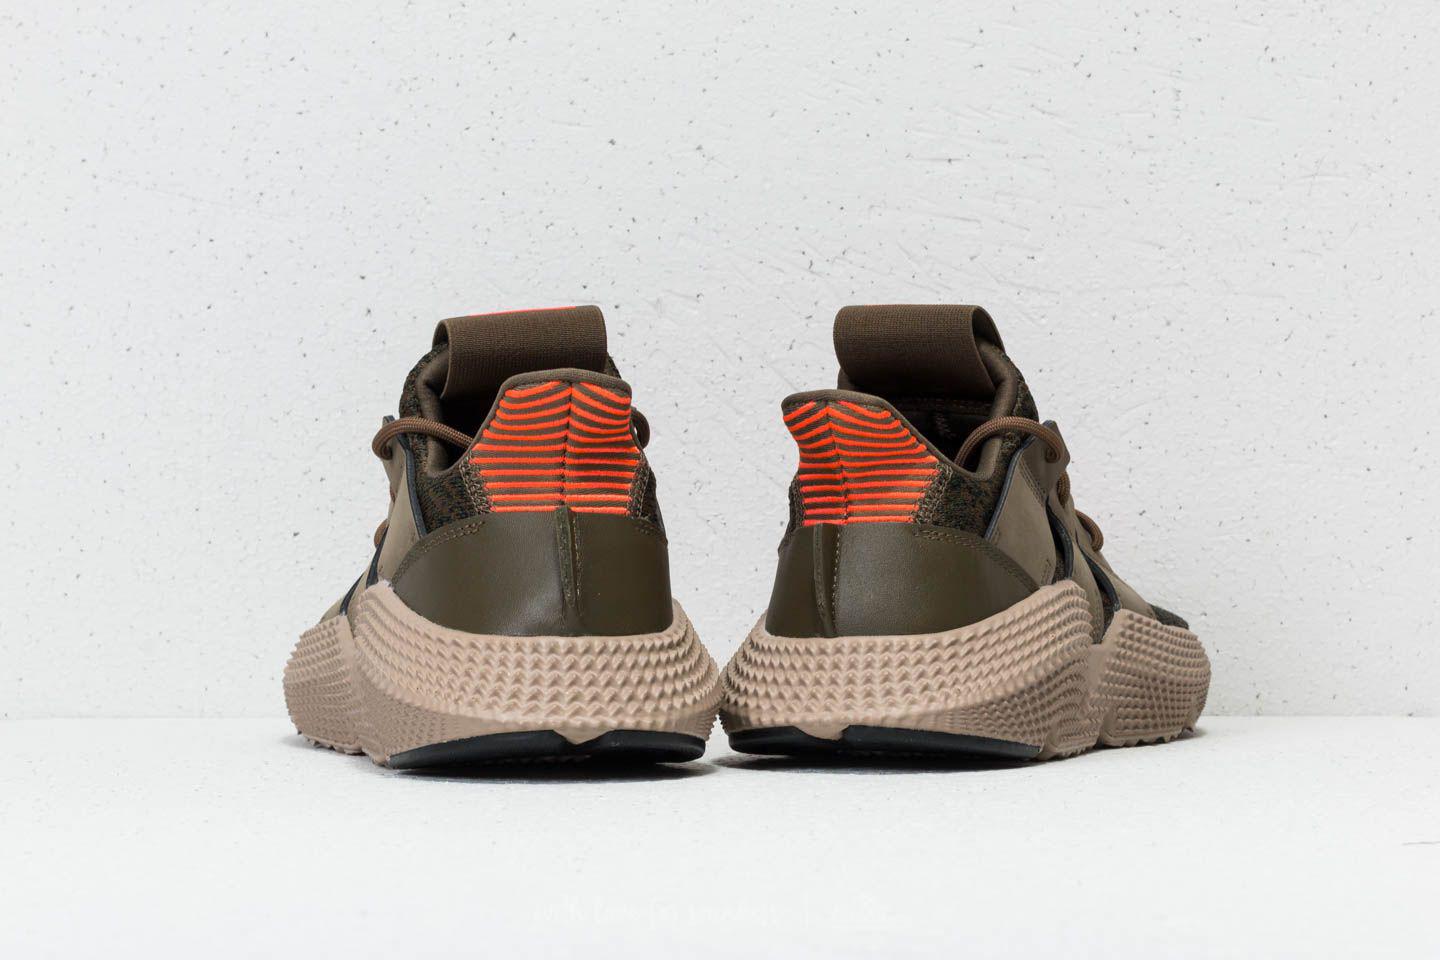 adidas Originals Rubber Adidas Prophere Trace Olive/ Trace Olive/ Solar Red  for Men - Lyst